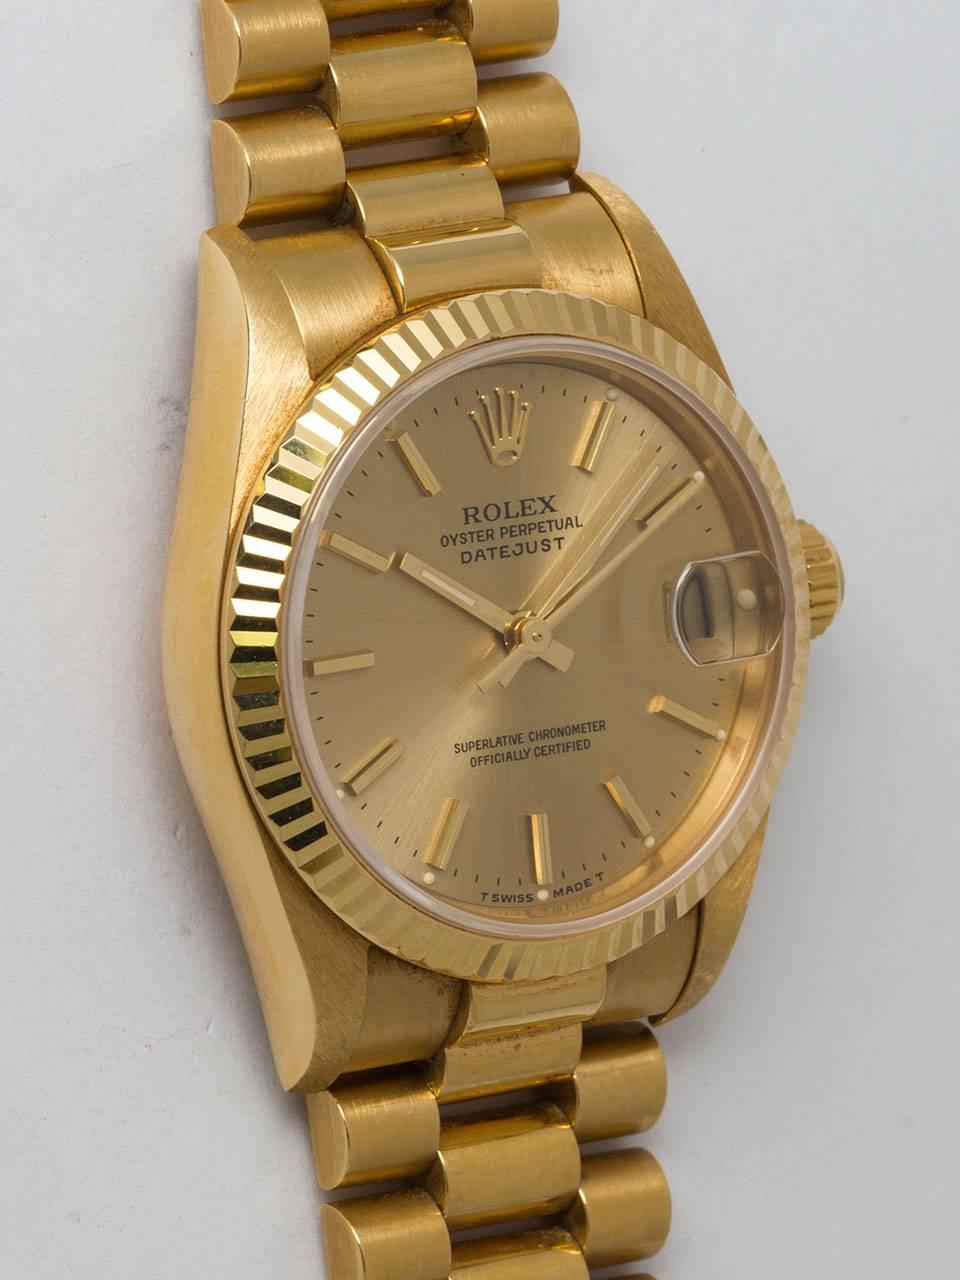 Rolex 18K Yellow Gold Midsize Datejust ref 68278 serial #W6 circa 1996. 30mm diameter Oyster case with fluted bezel and sapphire crystal. Original gold color dial with applied gold indexes and hands. Powered by automatic movement with quick set